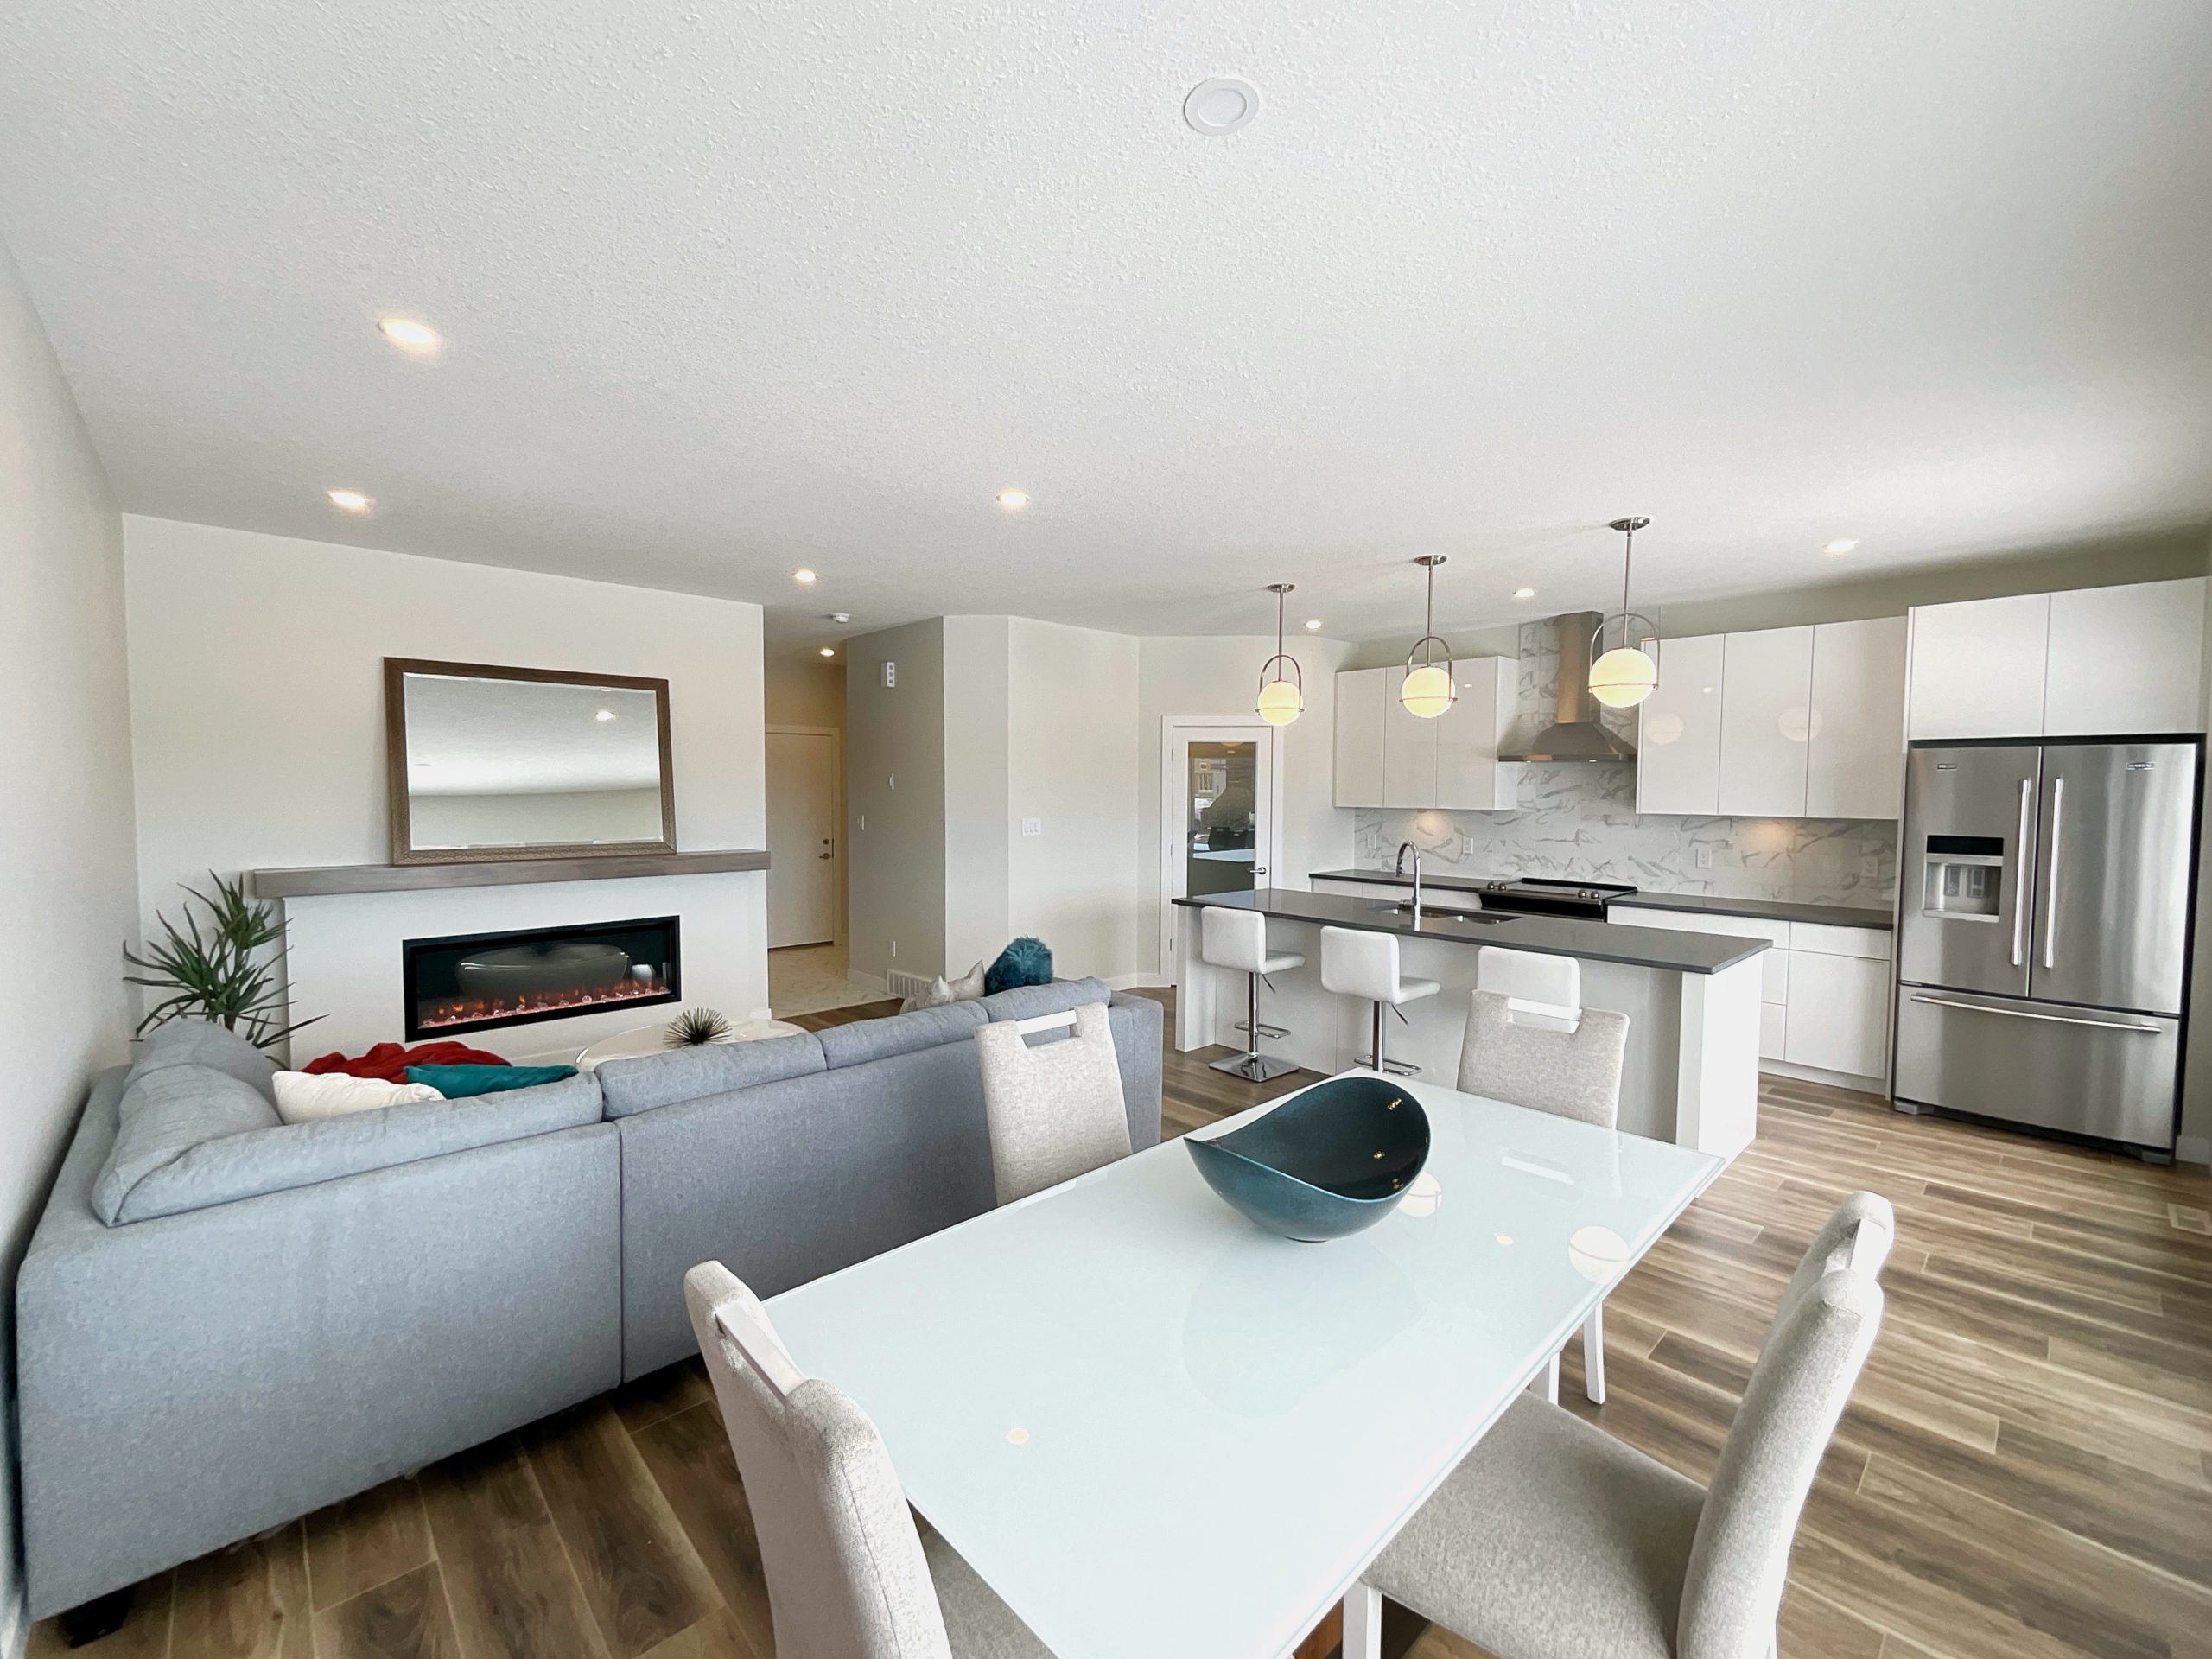 A modern townhome with a white glass table in the open concept living area looking over the kitchen and living room.